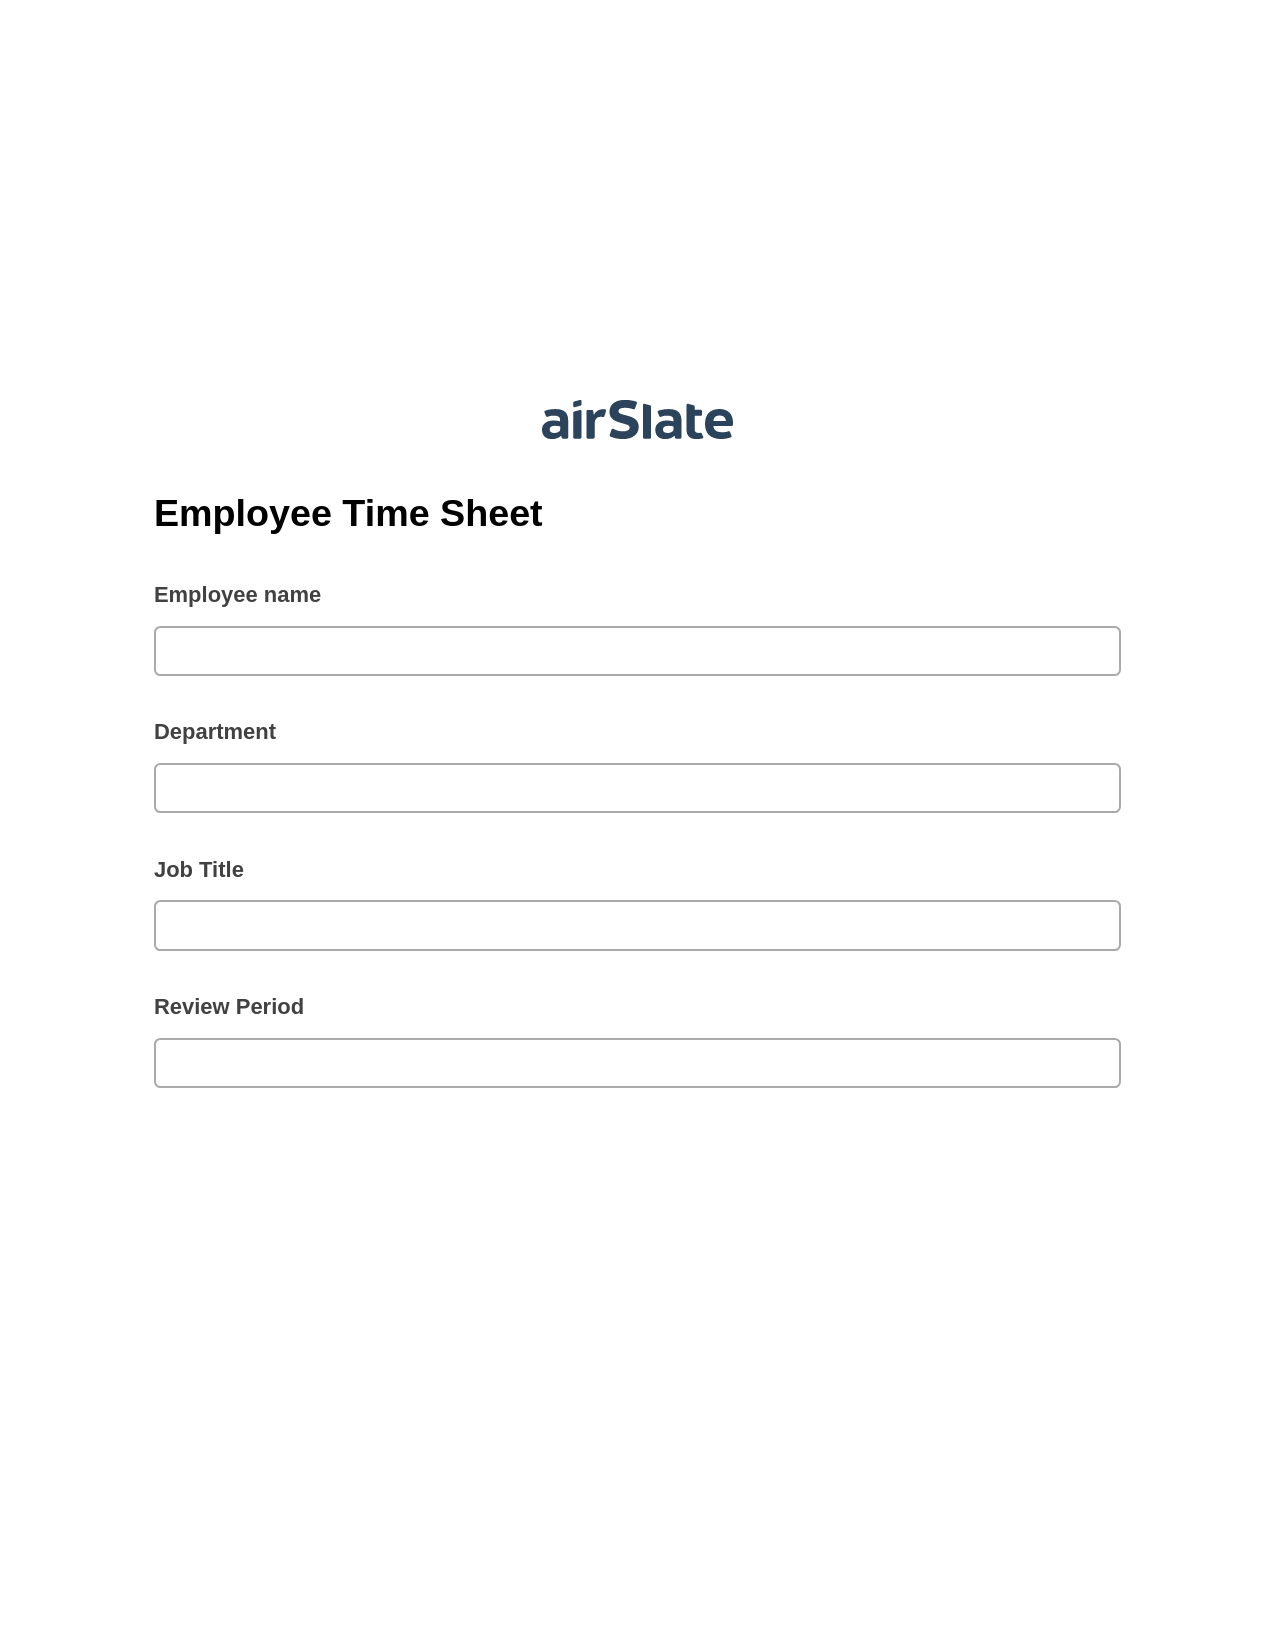 Employee Time Sheet Pre-fill from MS Dynamics 365 Records, Create Salesforce Records Bot, Export to Google Sheet Bot